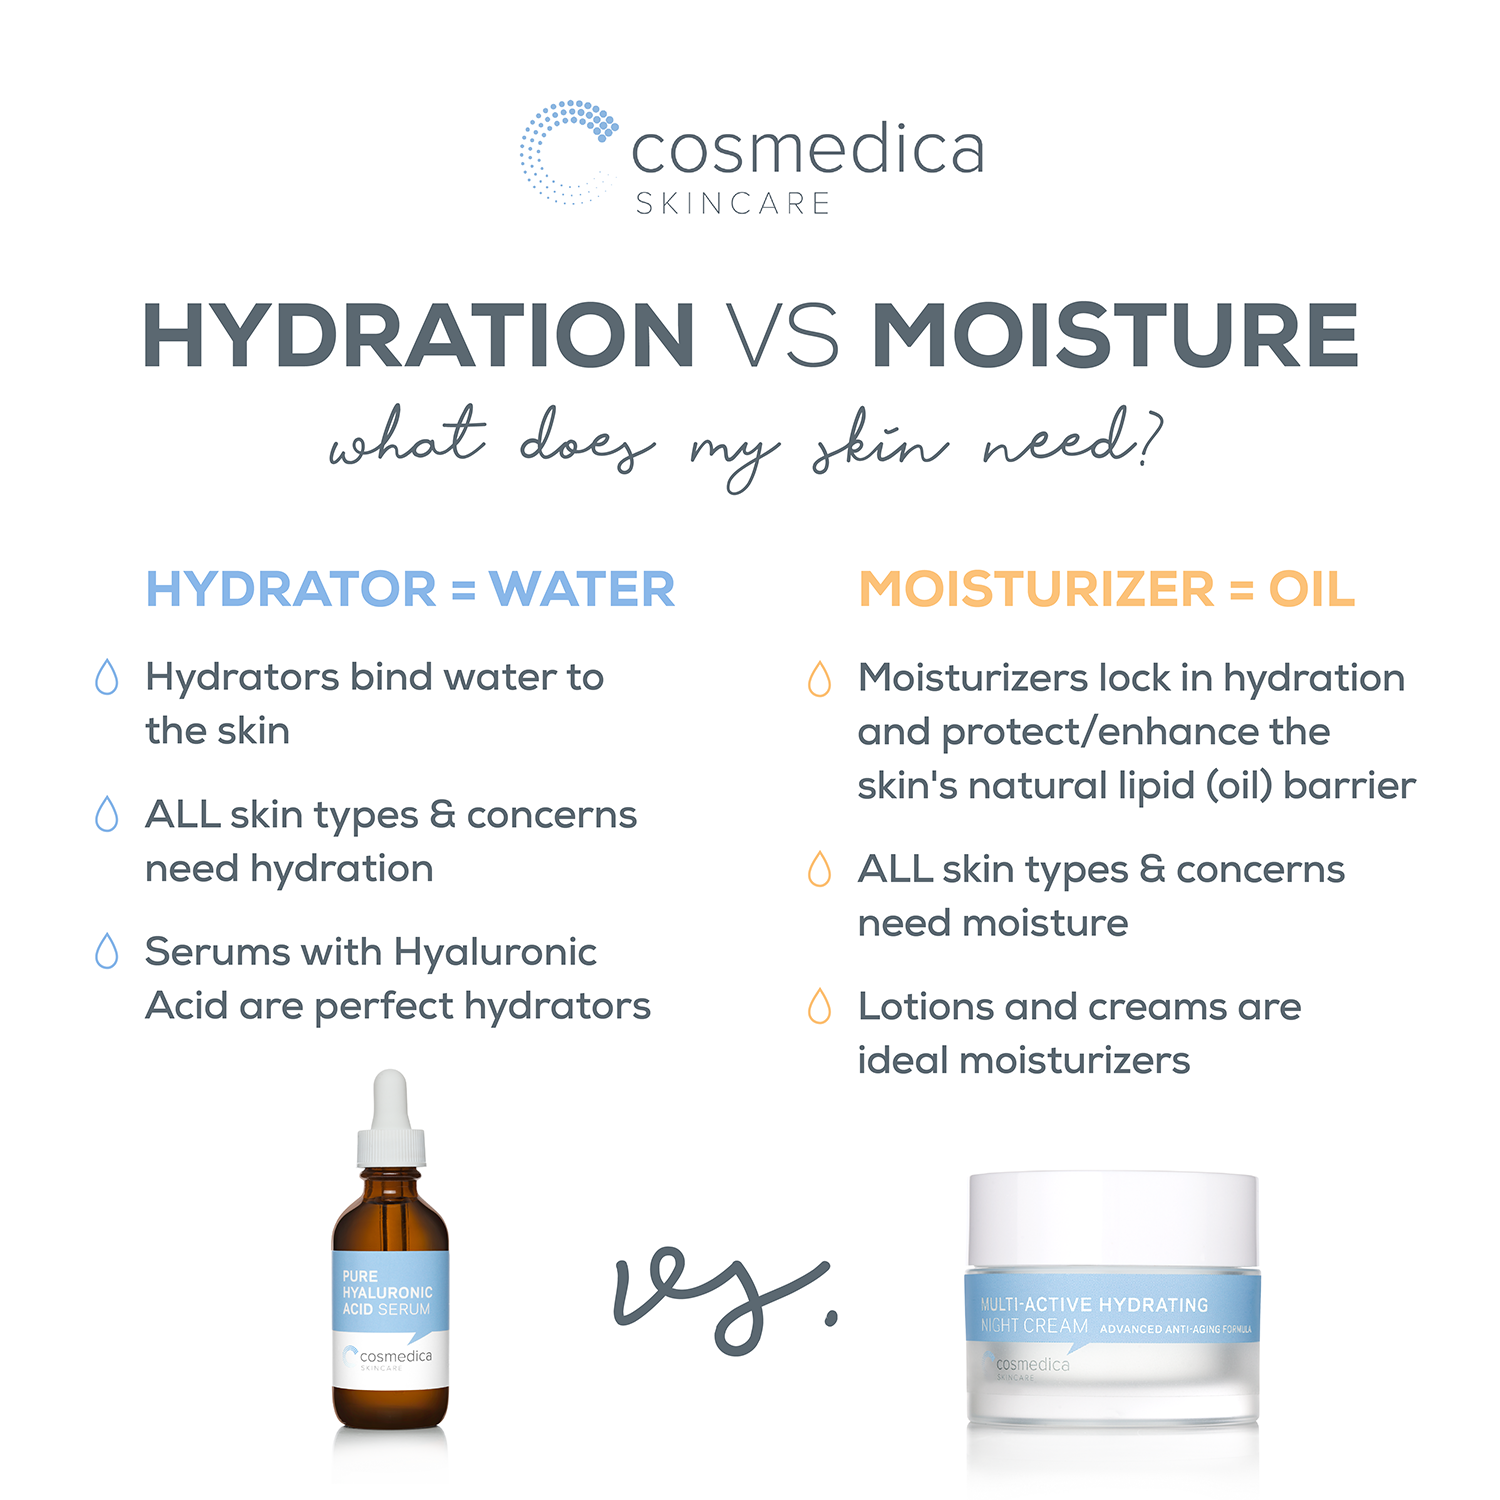 Hydration vs. Moisture: What Does My Skin Need?